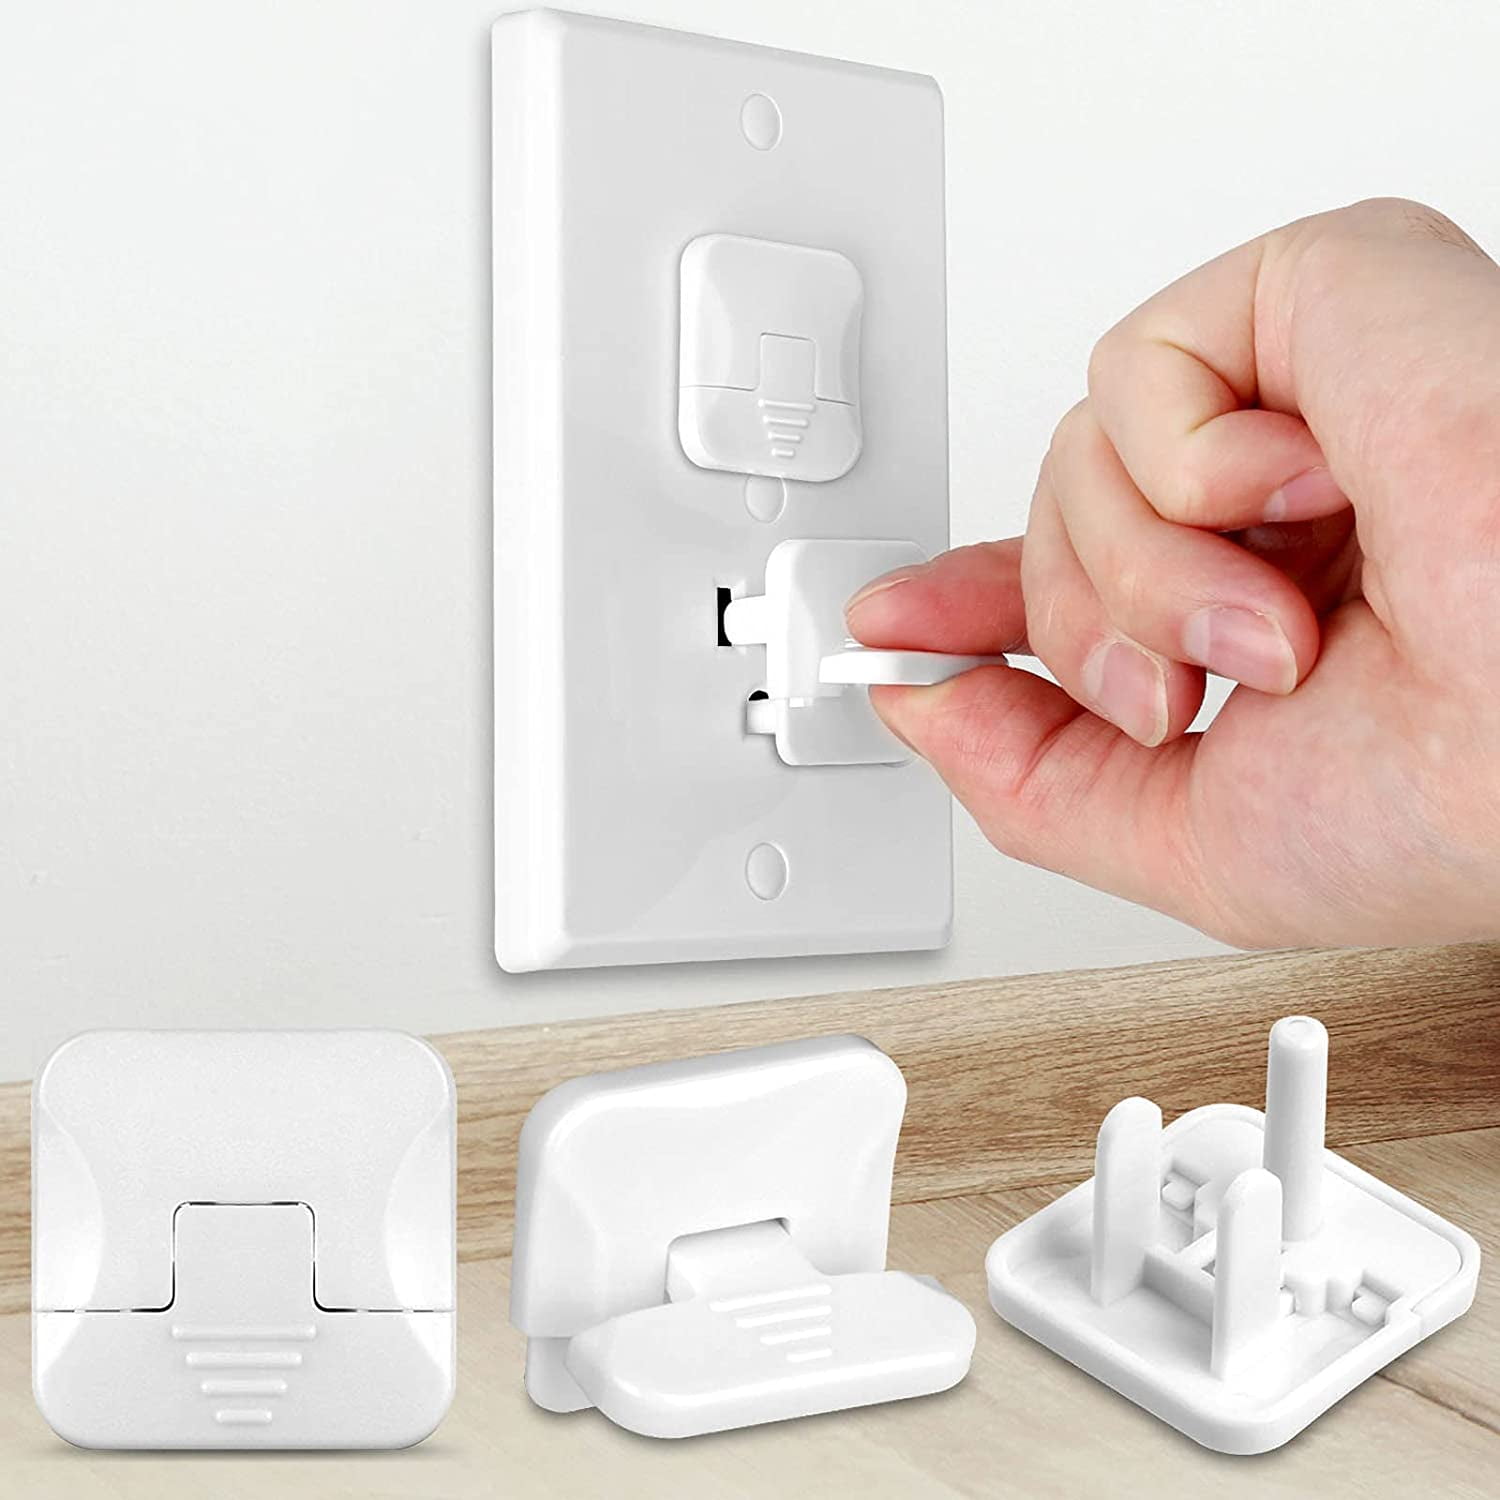 EUDEMON Baby Safety Electrical Outlet Cover Box Childproof Large Plug Cover for Babyproofing Outlets Easy to Install & Use White, Single Decorator Wall Plate